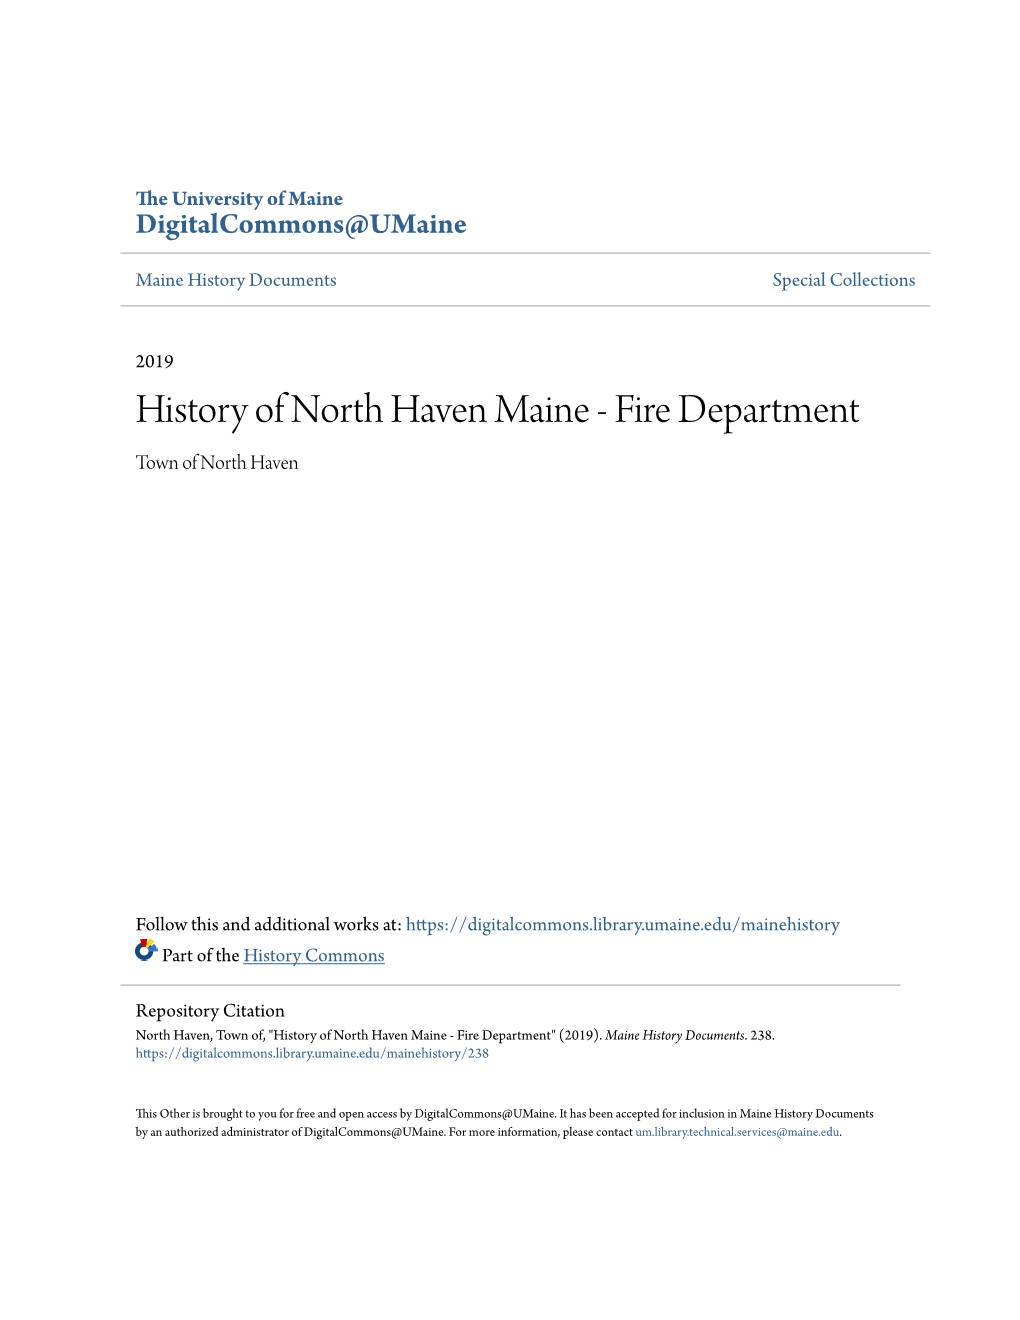 History of North Haven Maine - Fire Department Town of North Haven